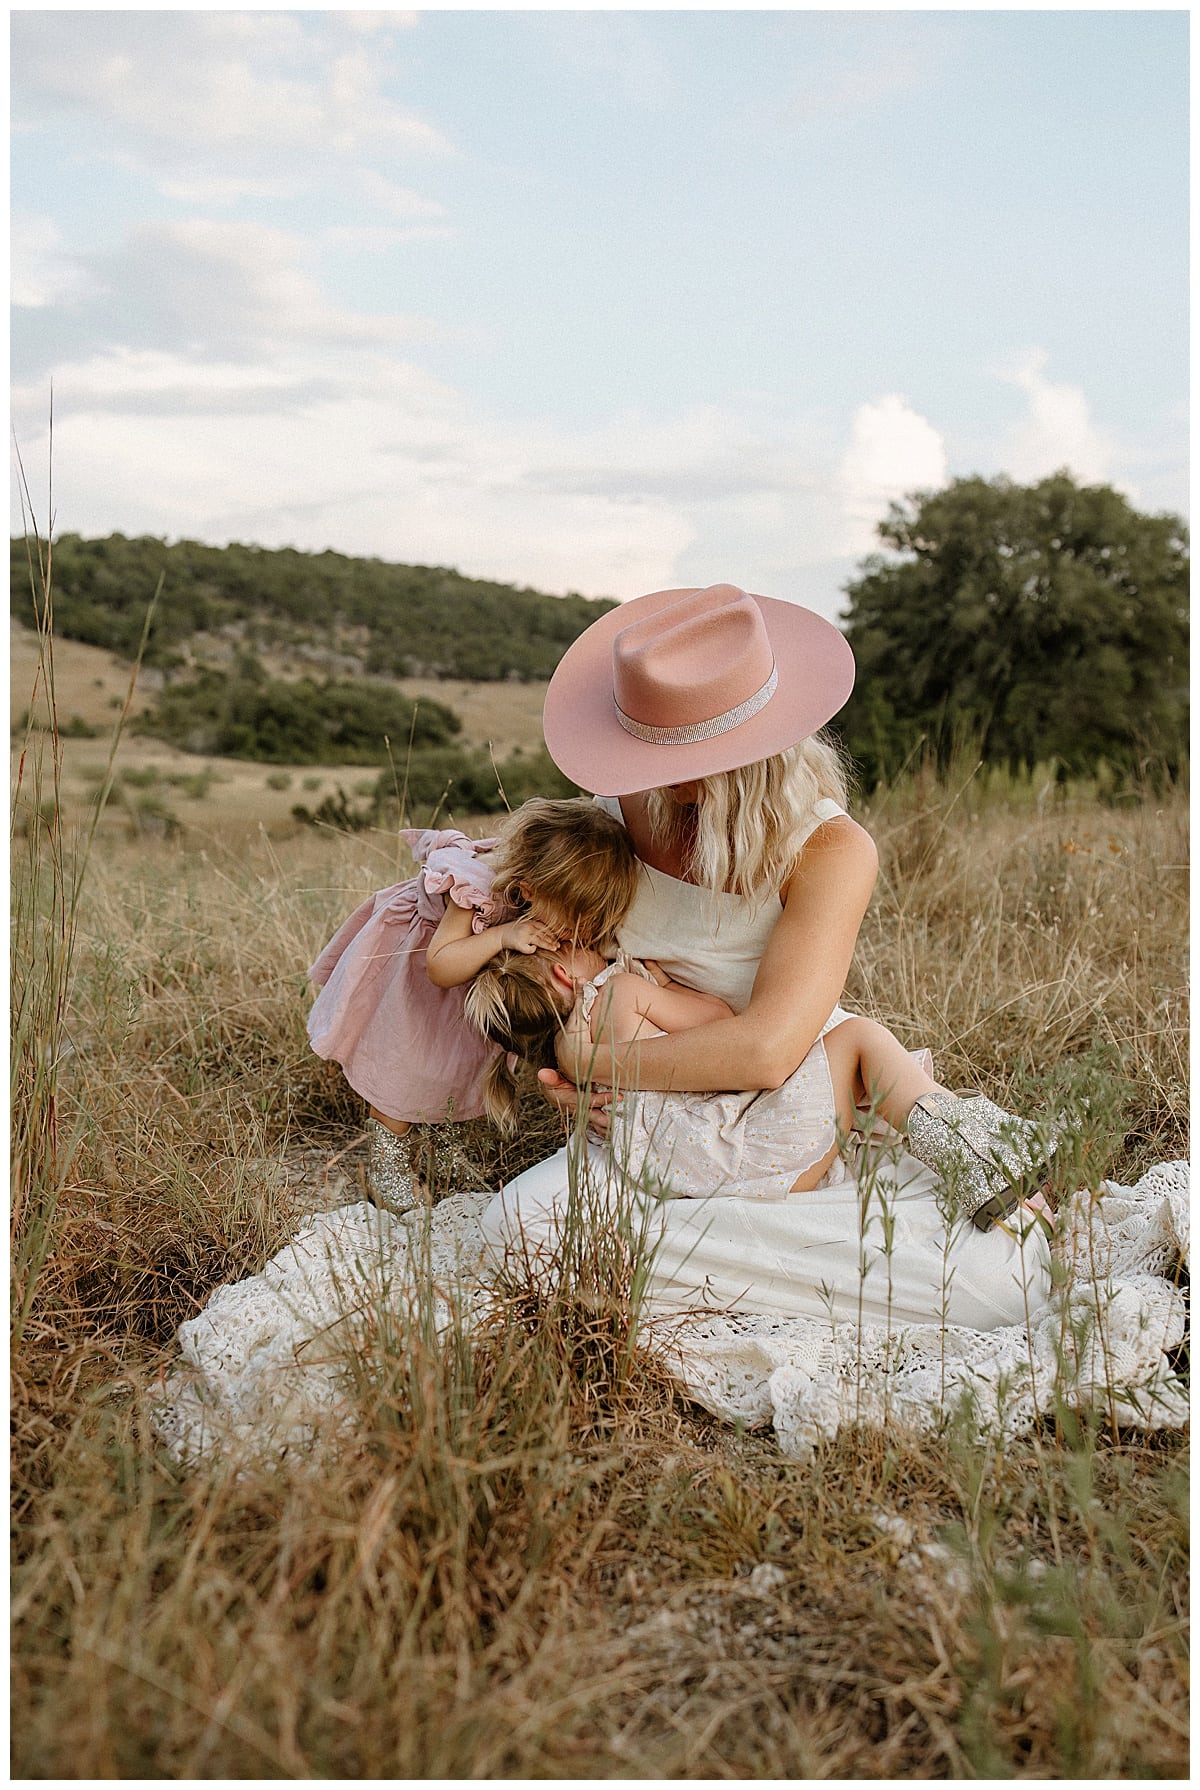 Mom and daughter spend time together for Outdoor Motherhood Story 